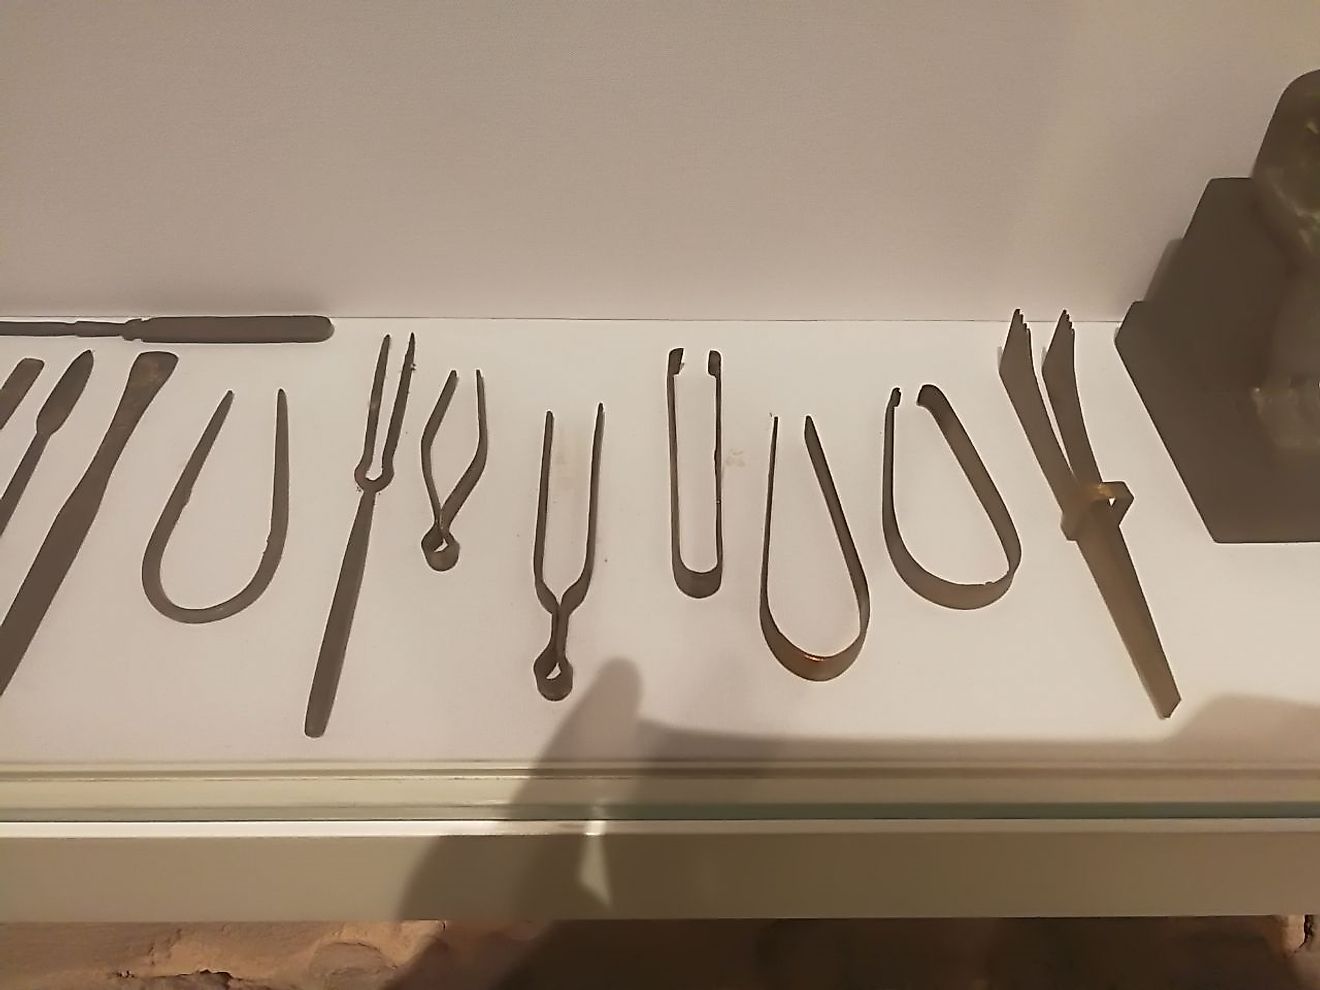 Ancient Egyptian medical & surgical tools. Image credit: Ashashyou/Wikimedia.org